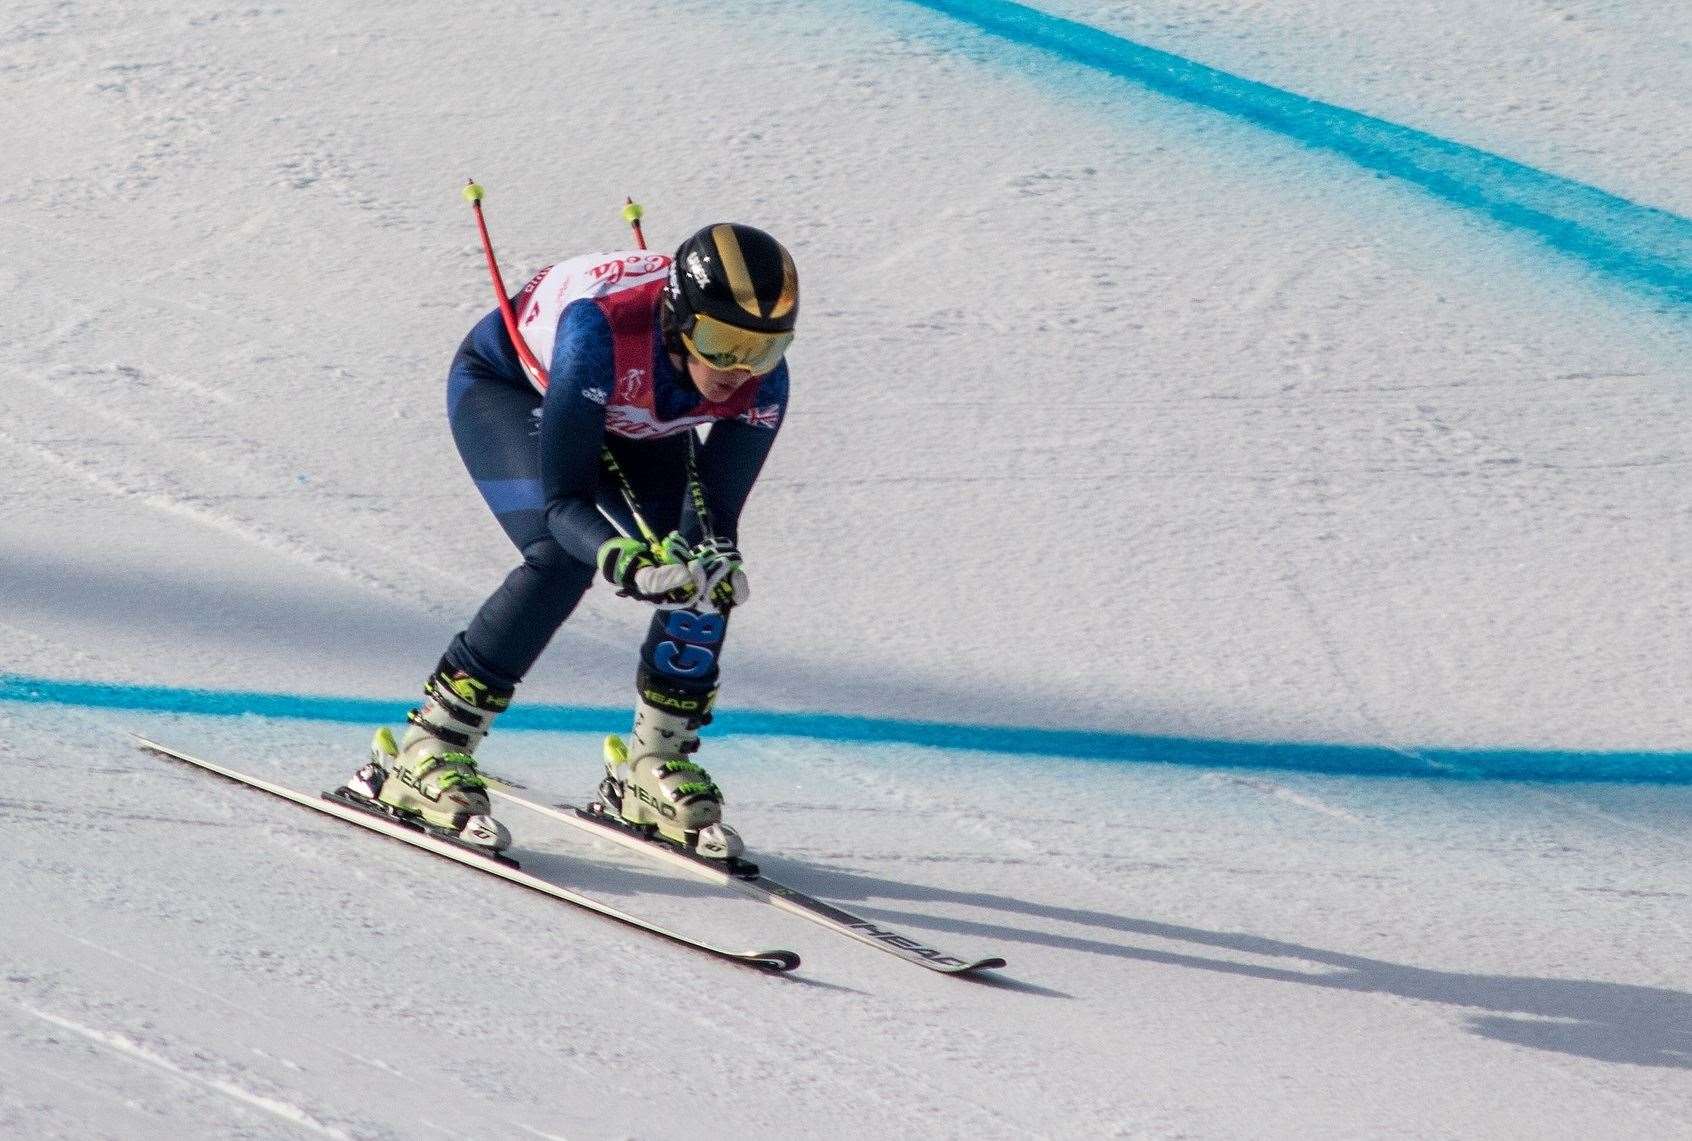 Knight in action at the winter Paralympics